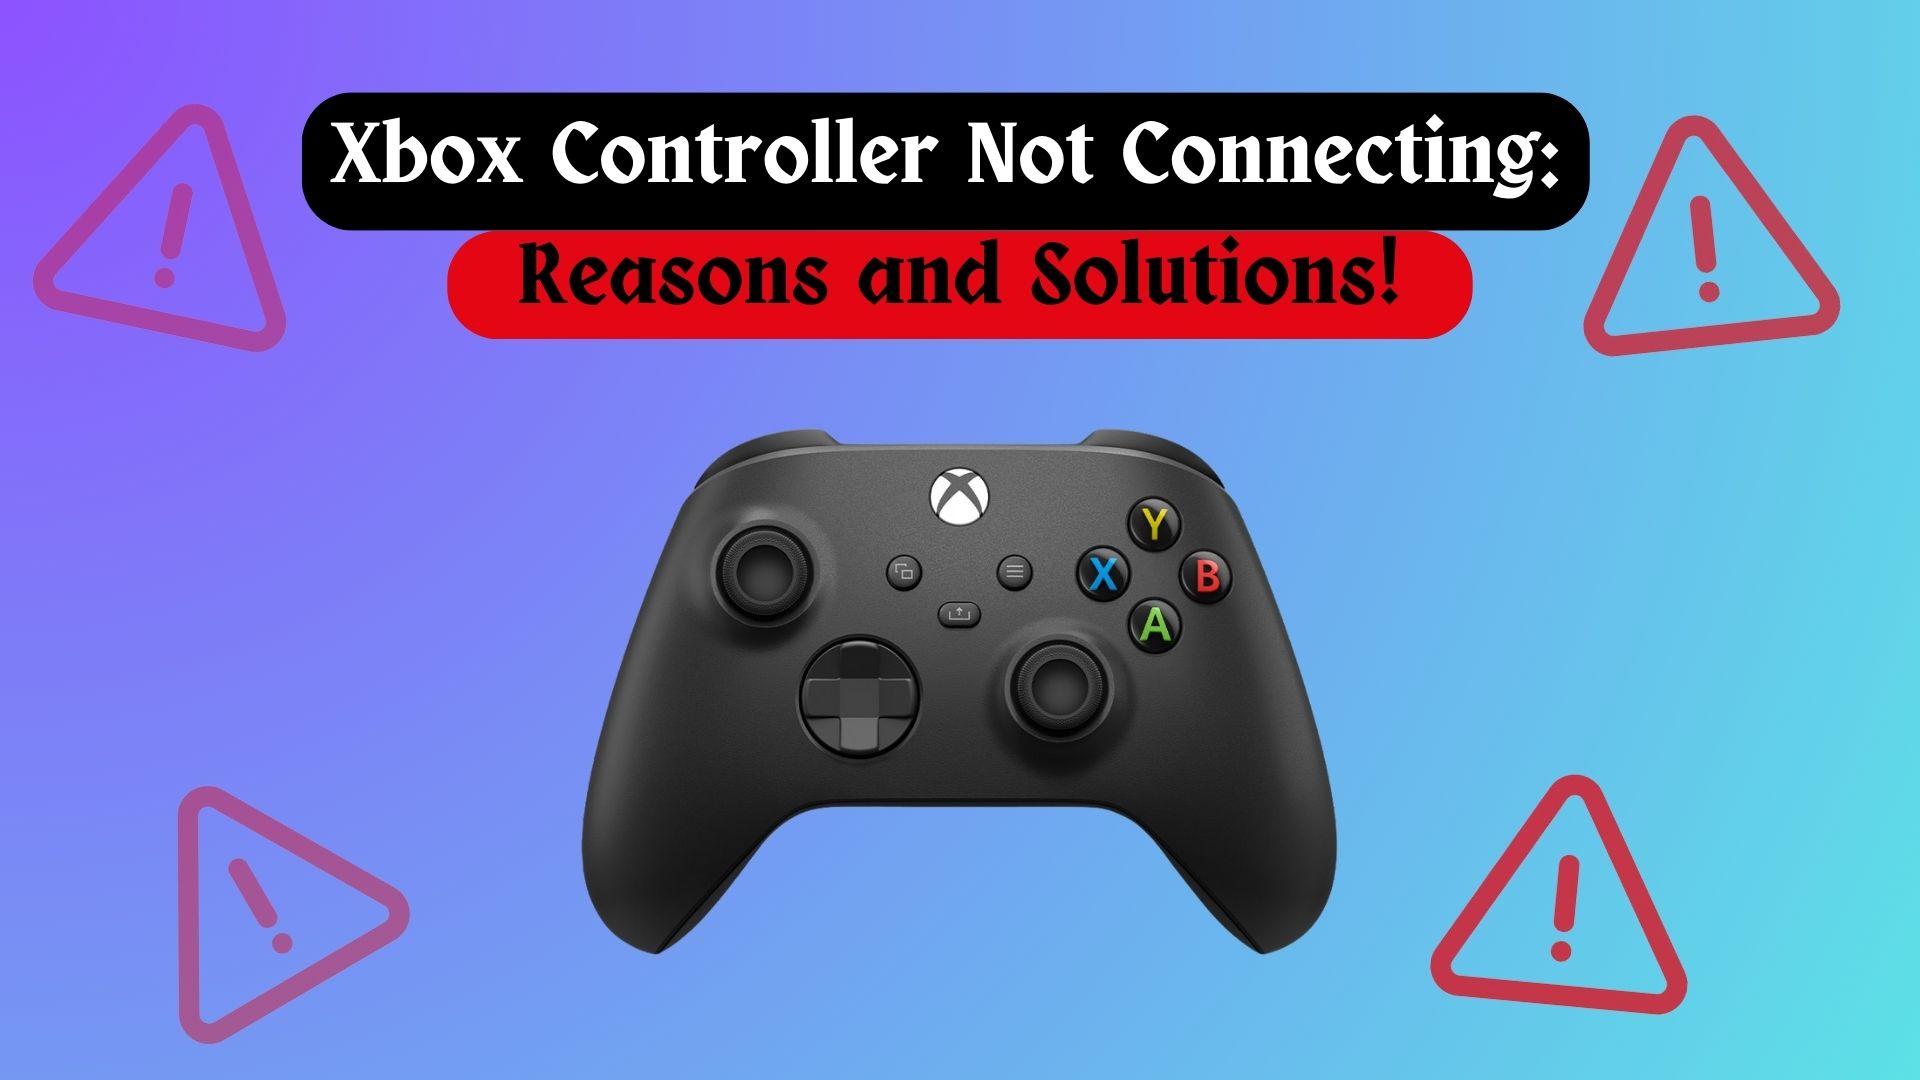 Xbox Controller Not Connecting: Reasons and Solutions!